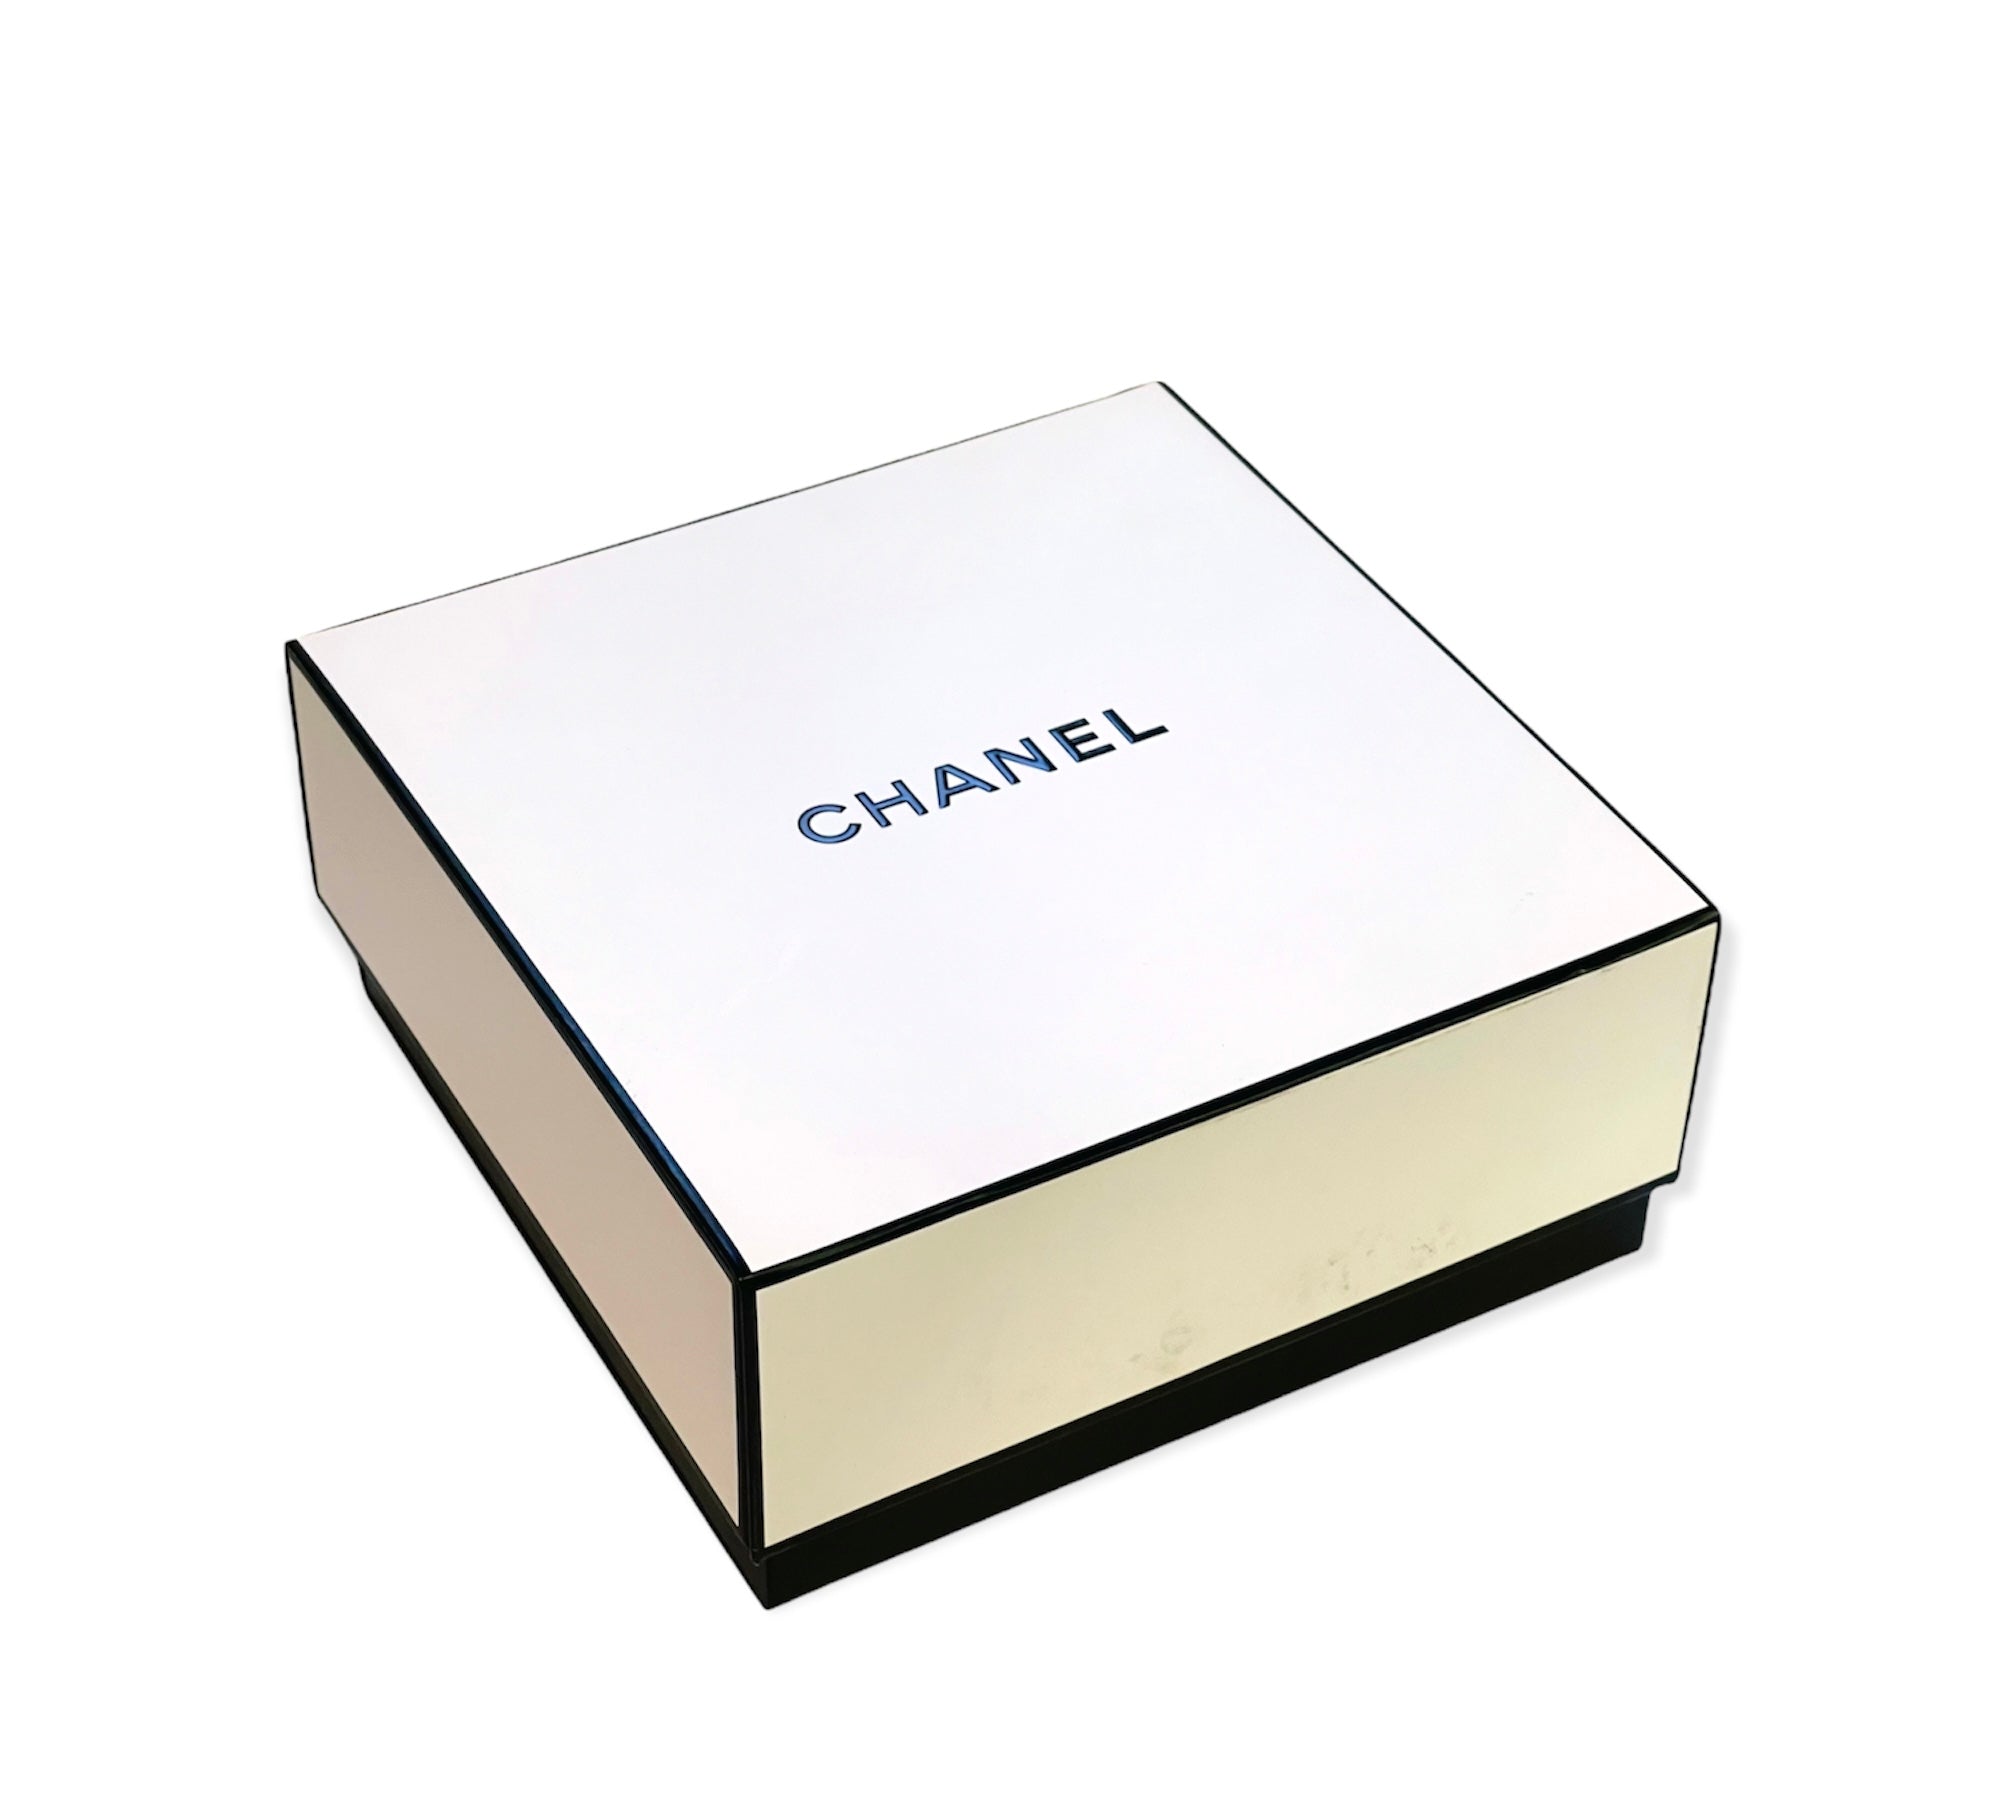 CHANEL Gabrielle CHANEL Essence 100ml With Gift Box